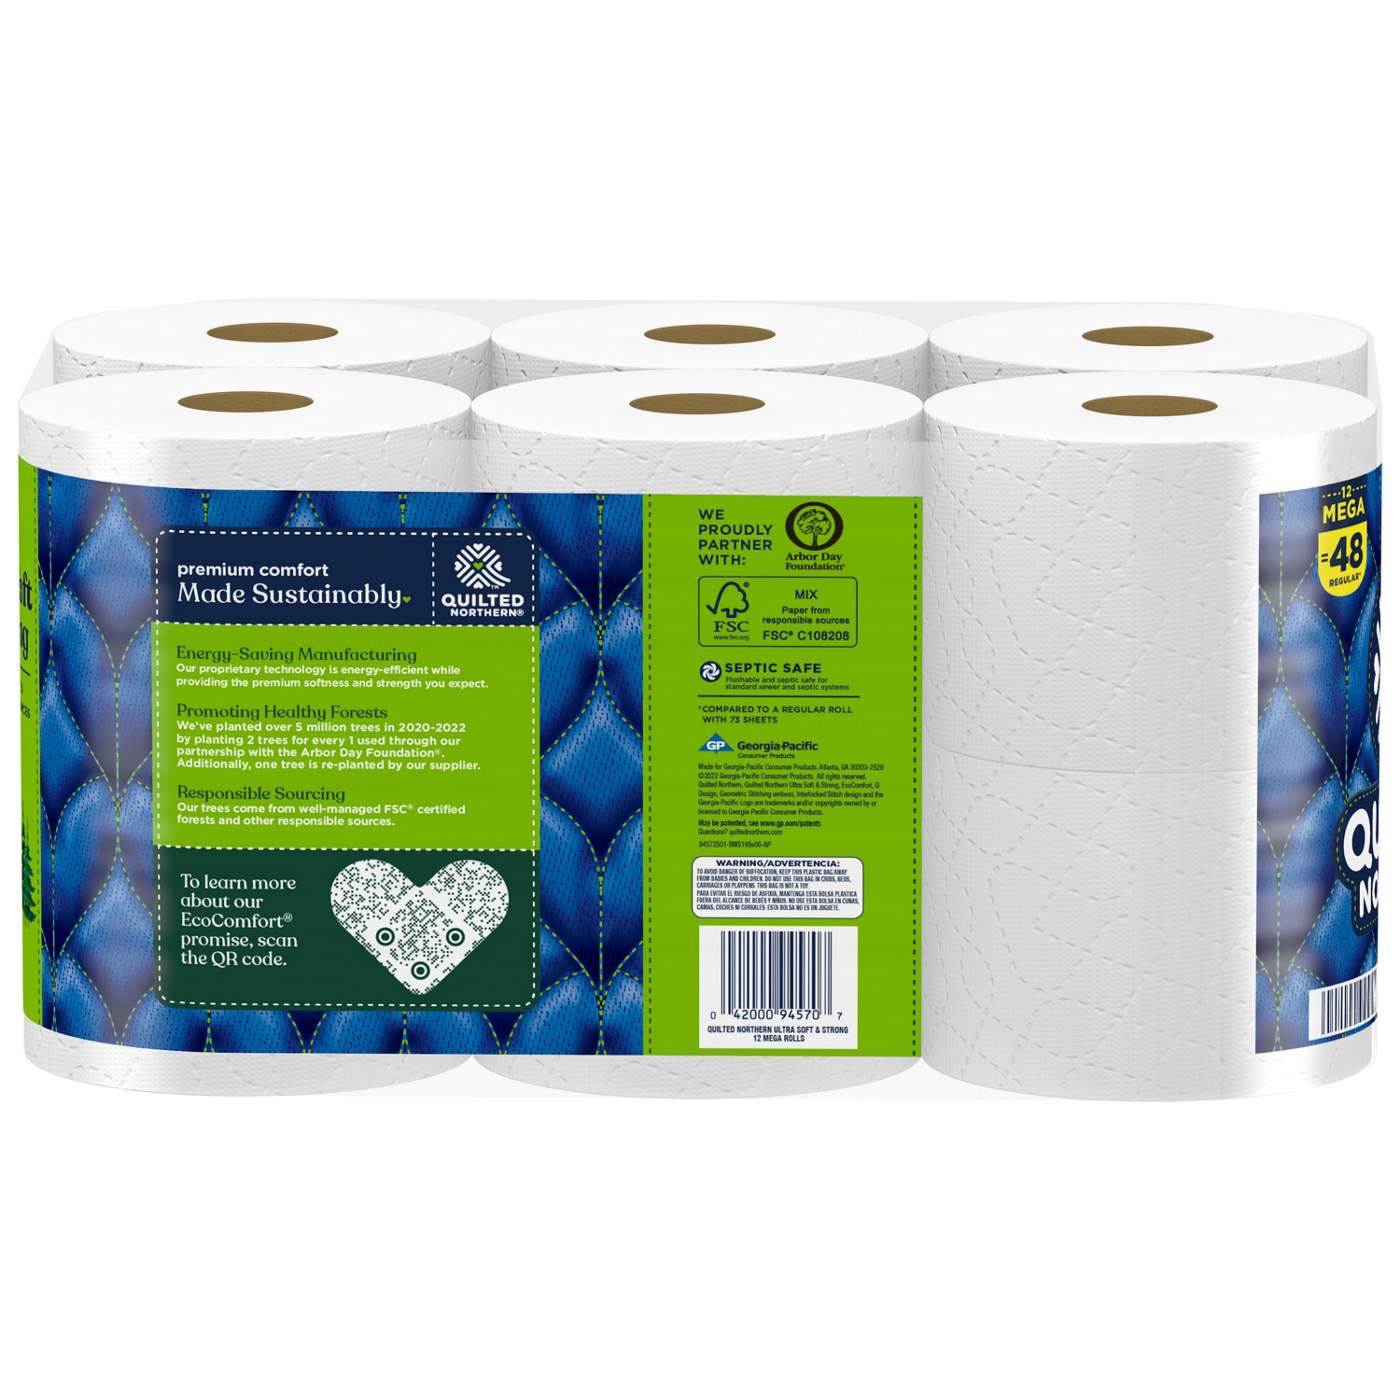 Quilted Northern Ultra Soft & Strong Toilet Paper; image 3 of 3